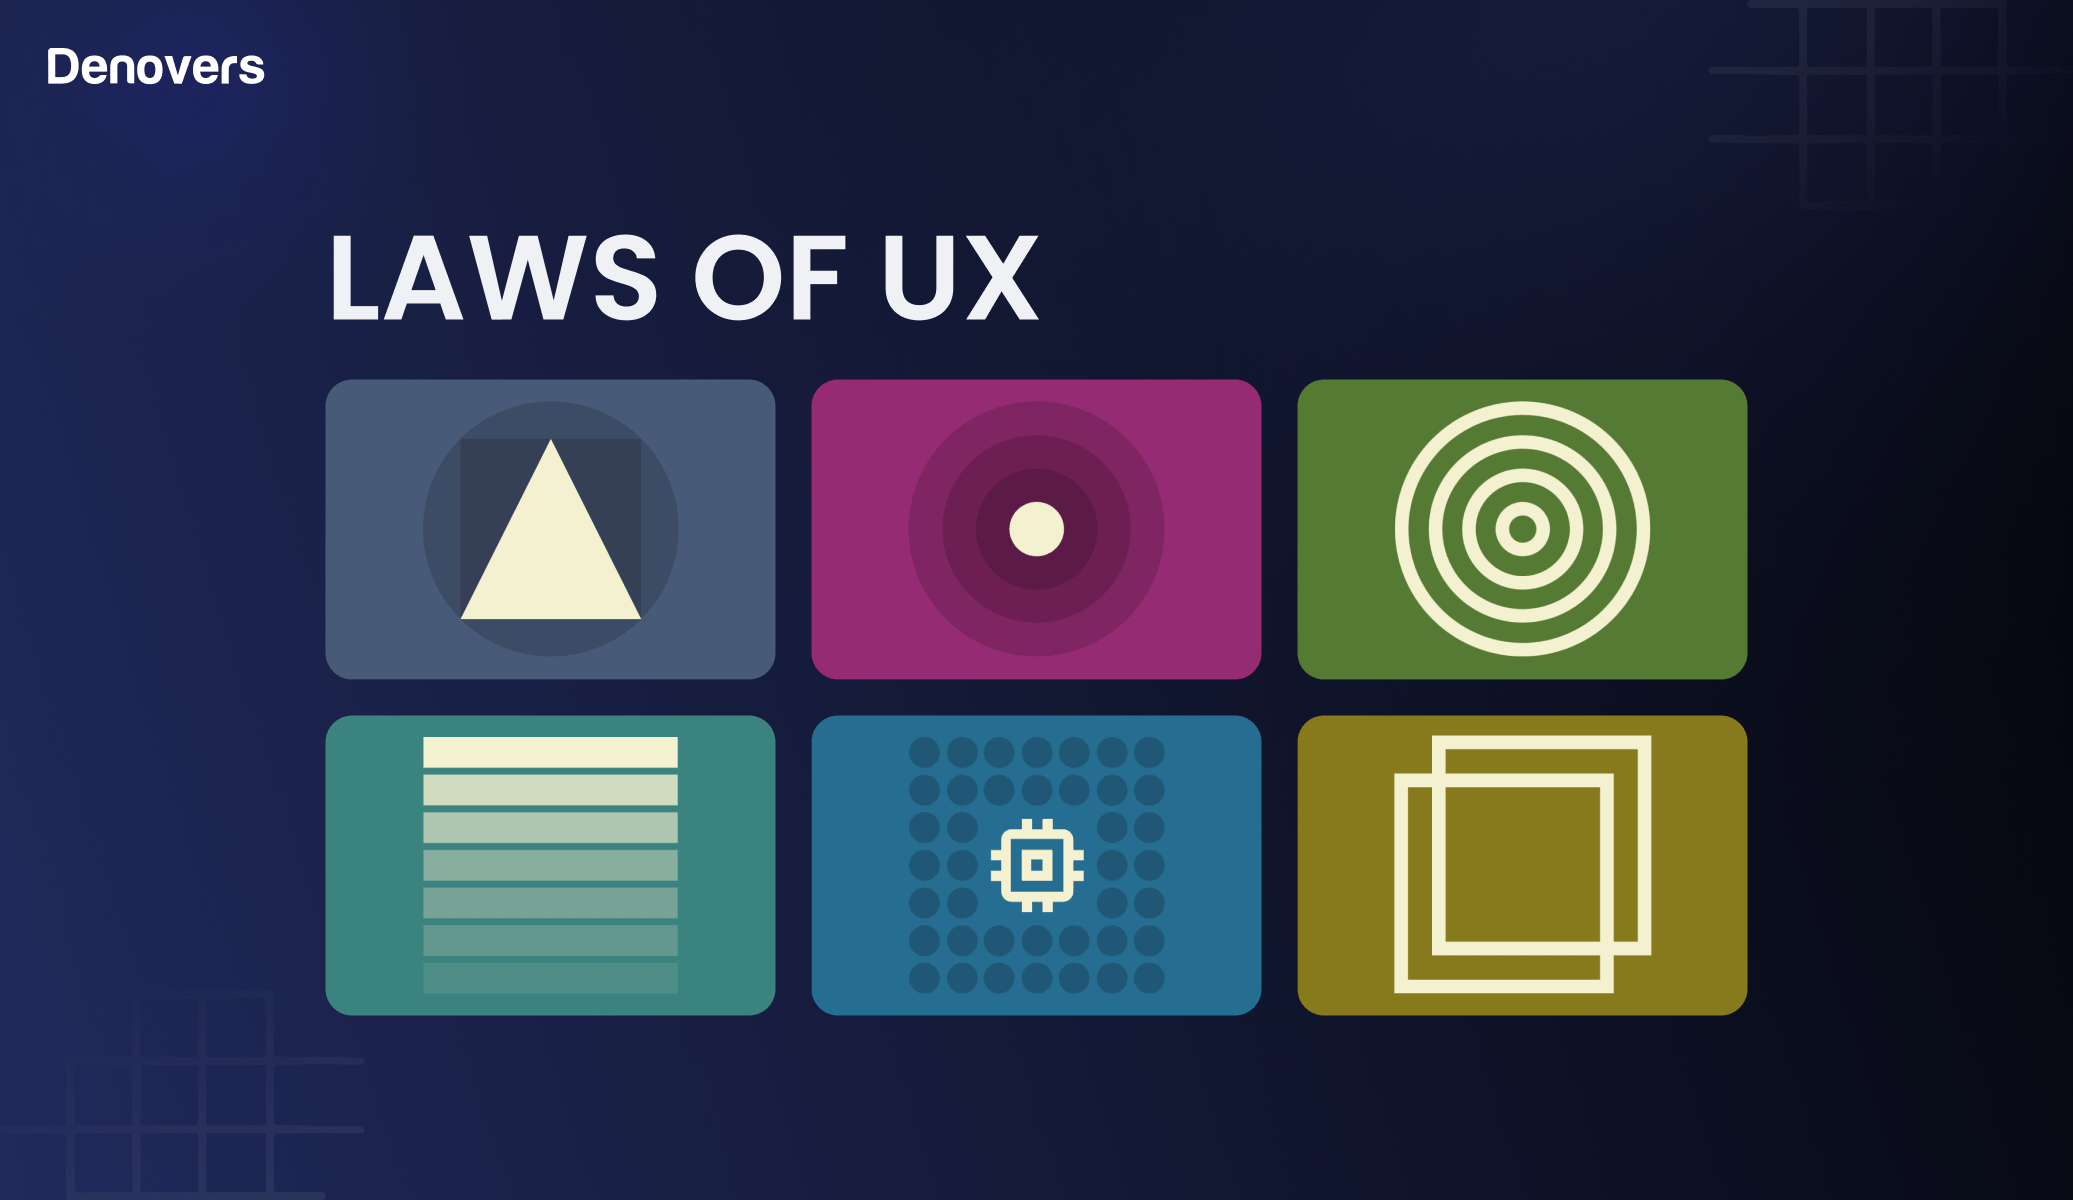 ux-law-banner